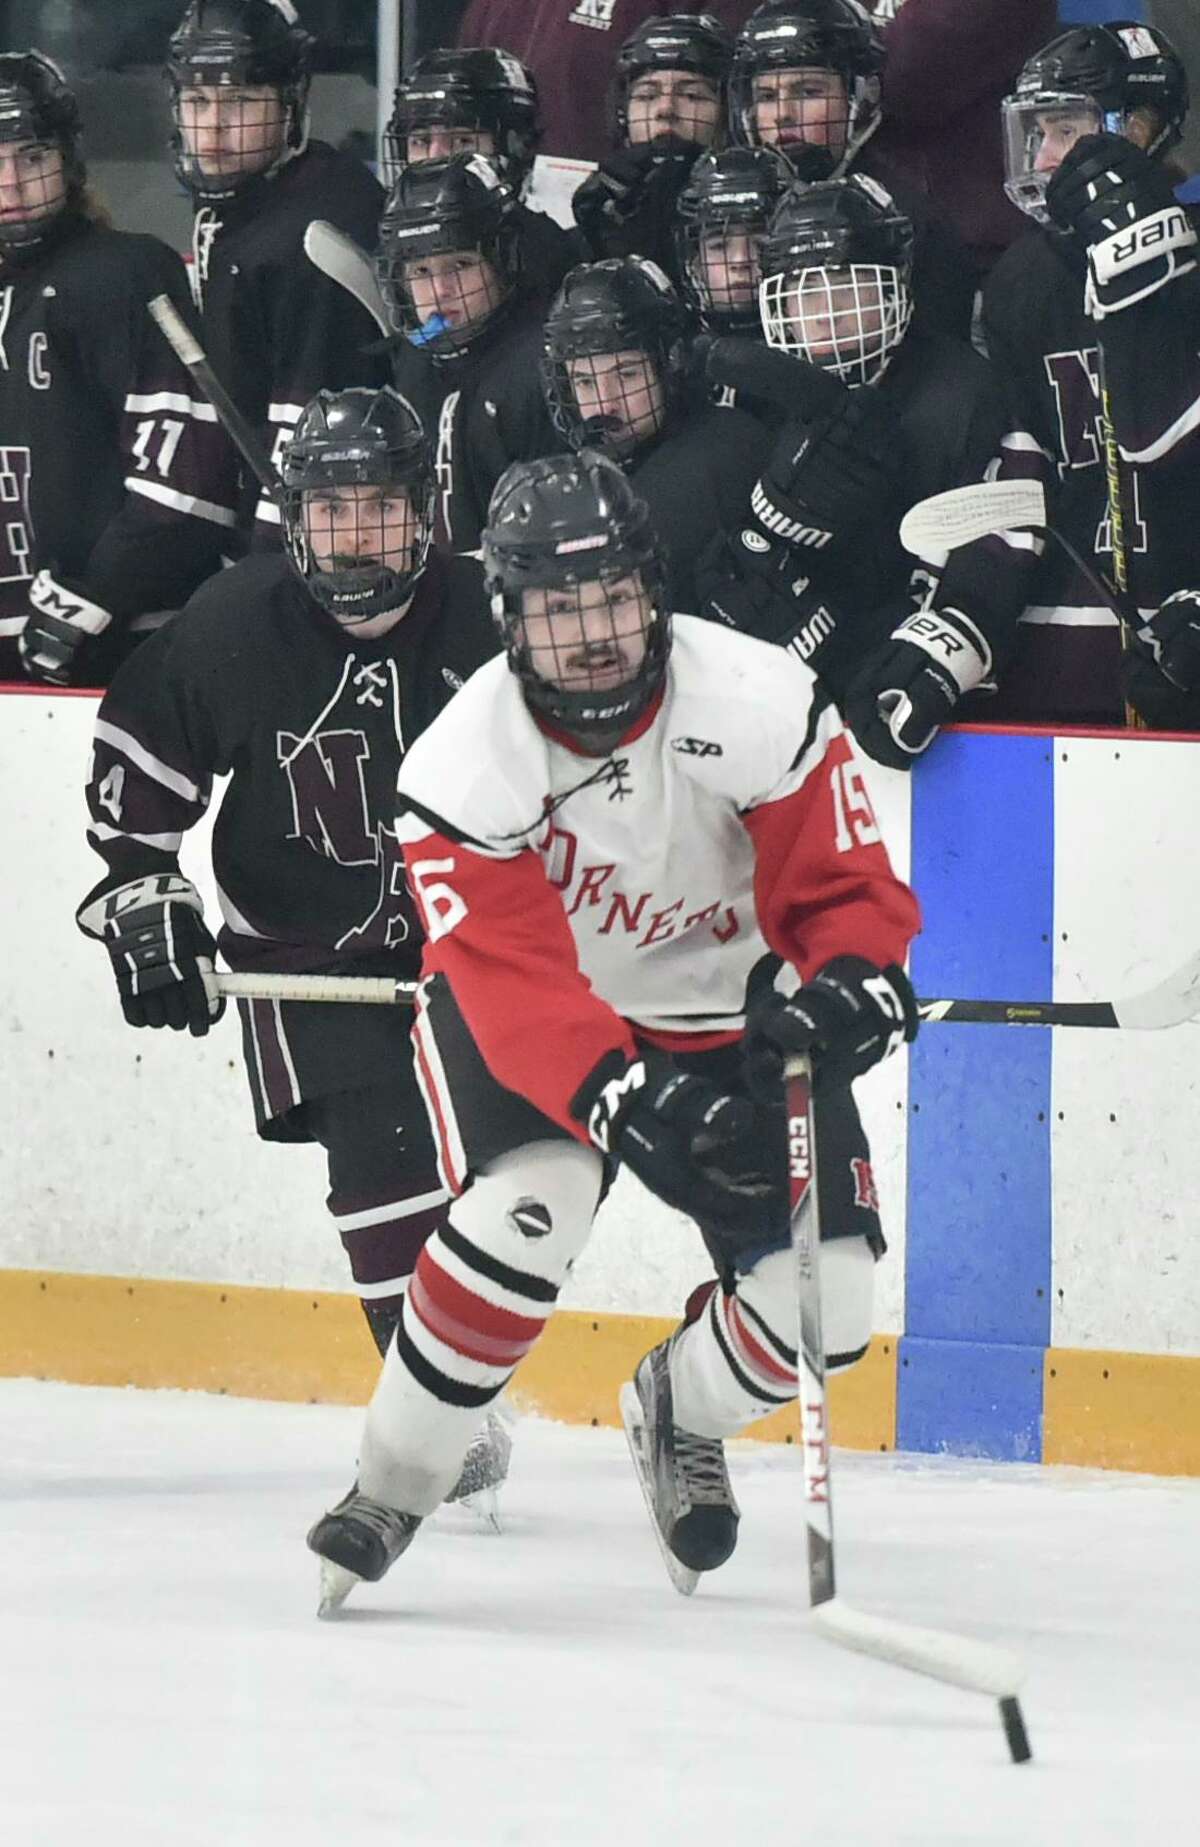 West Haven, Connecticut - Saturday, March 07, 2020: Branford H.S. vs. North Haven H.S. during the SCC/SWC 2020 Boys Ice Hockey Division II Championship Saturday at Bennett Rink in West Haven